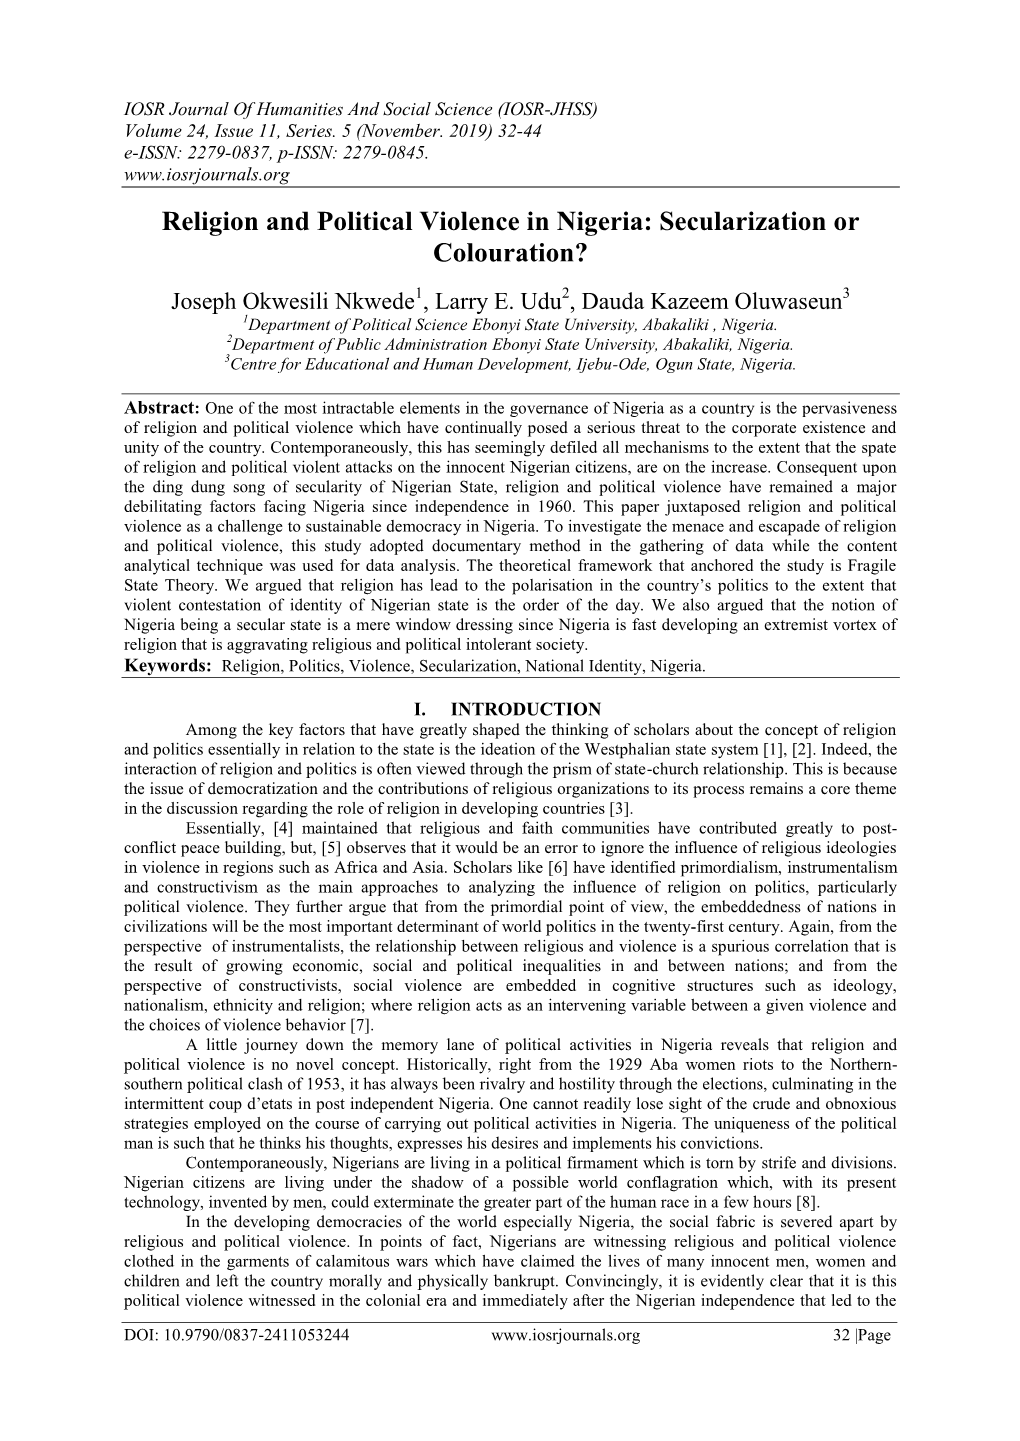 Religion and Political Violence in Nigeria: Secularization Or Colouration?